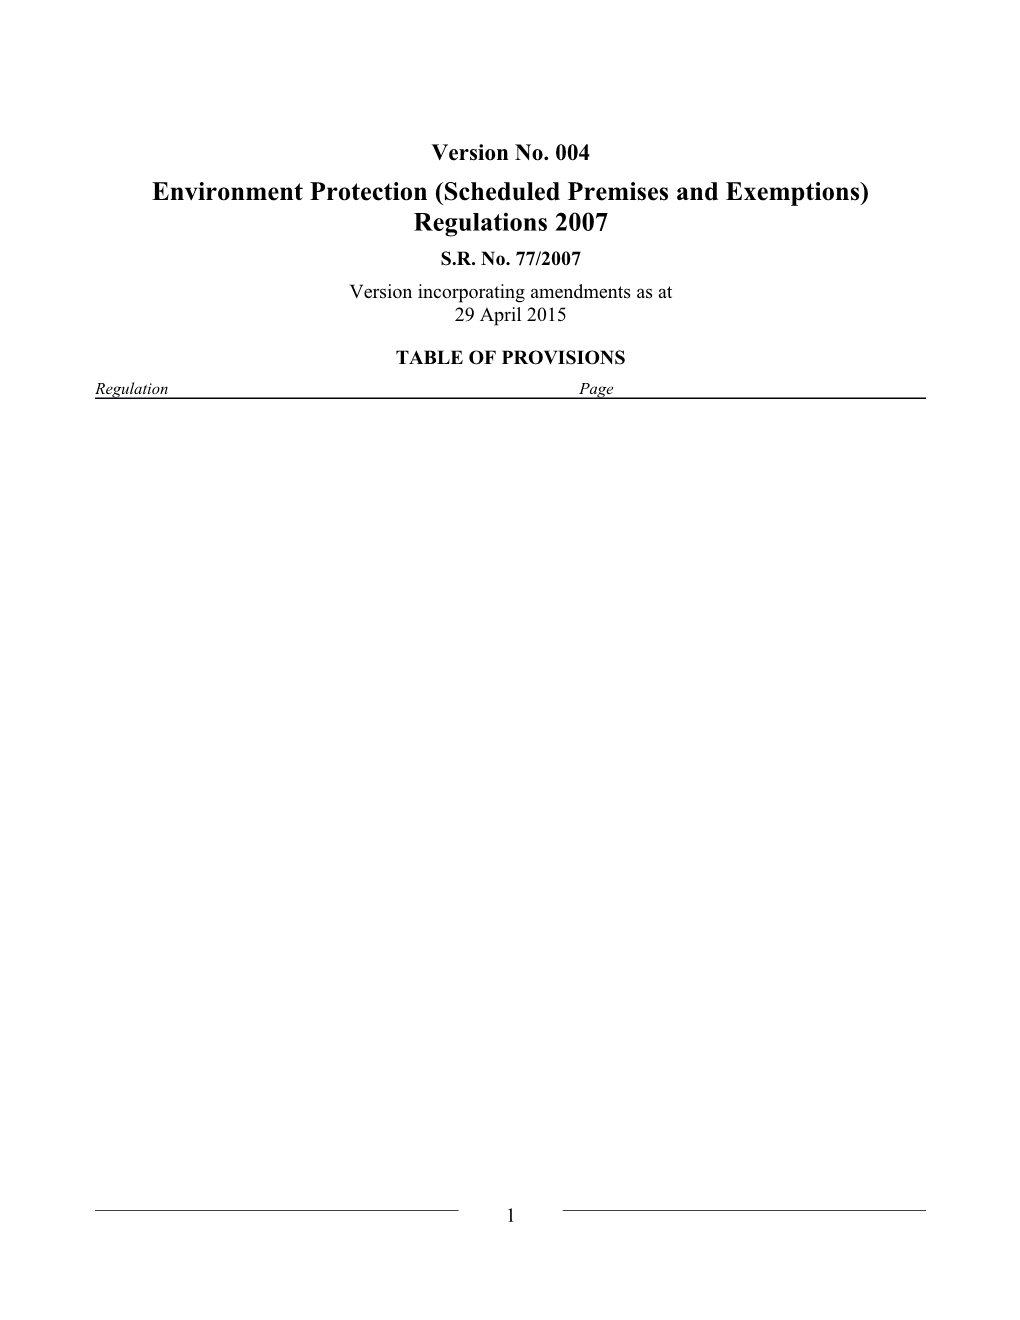 Environment Protection (Scheduled Premises and Exemptions) Regulations 2007